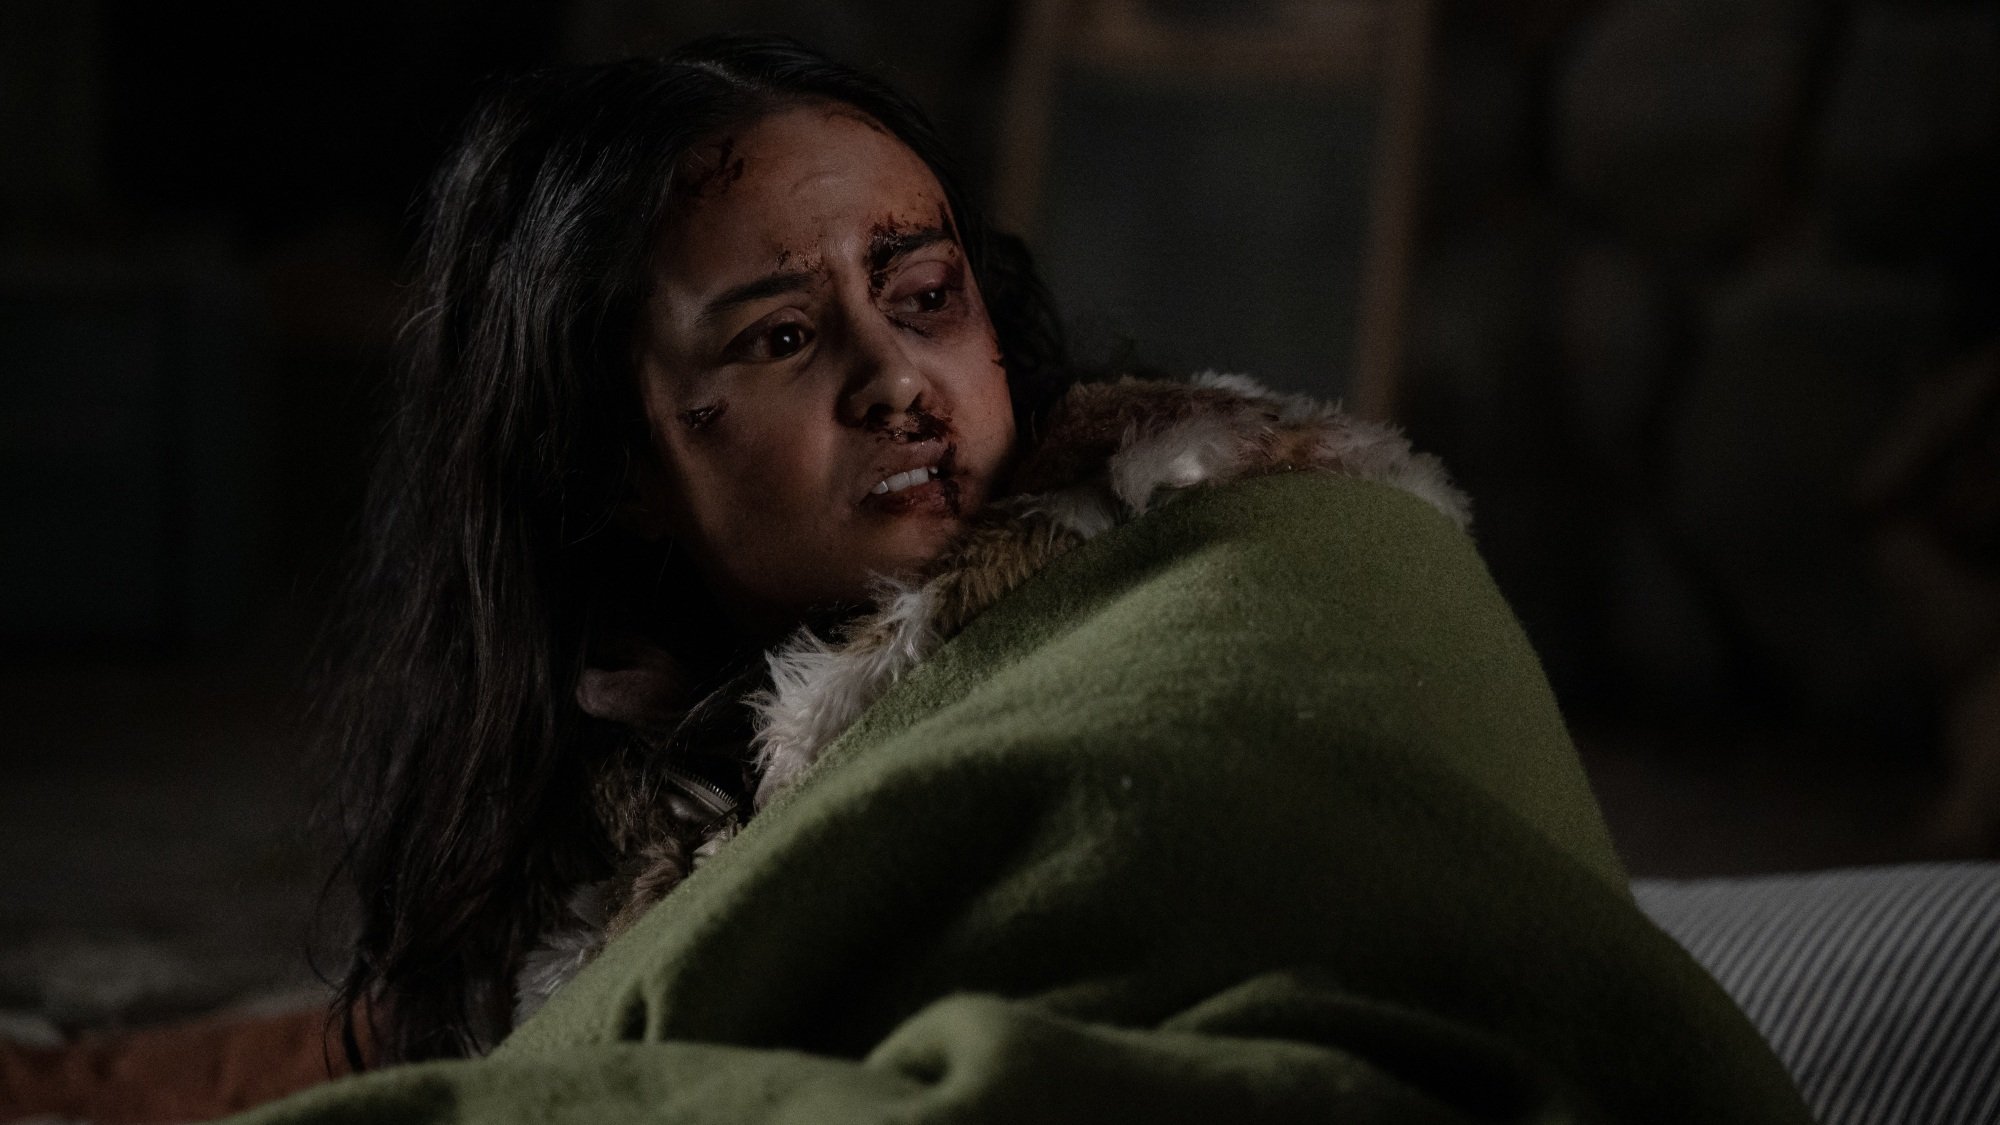 A young woman with a bruised and bloody face lying on the ground in a cabin.